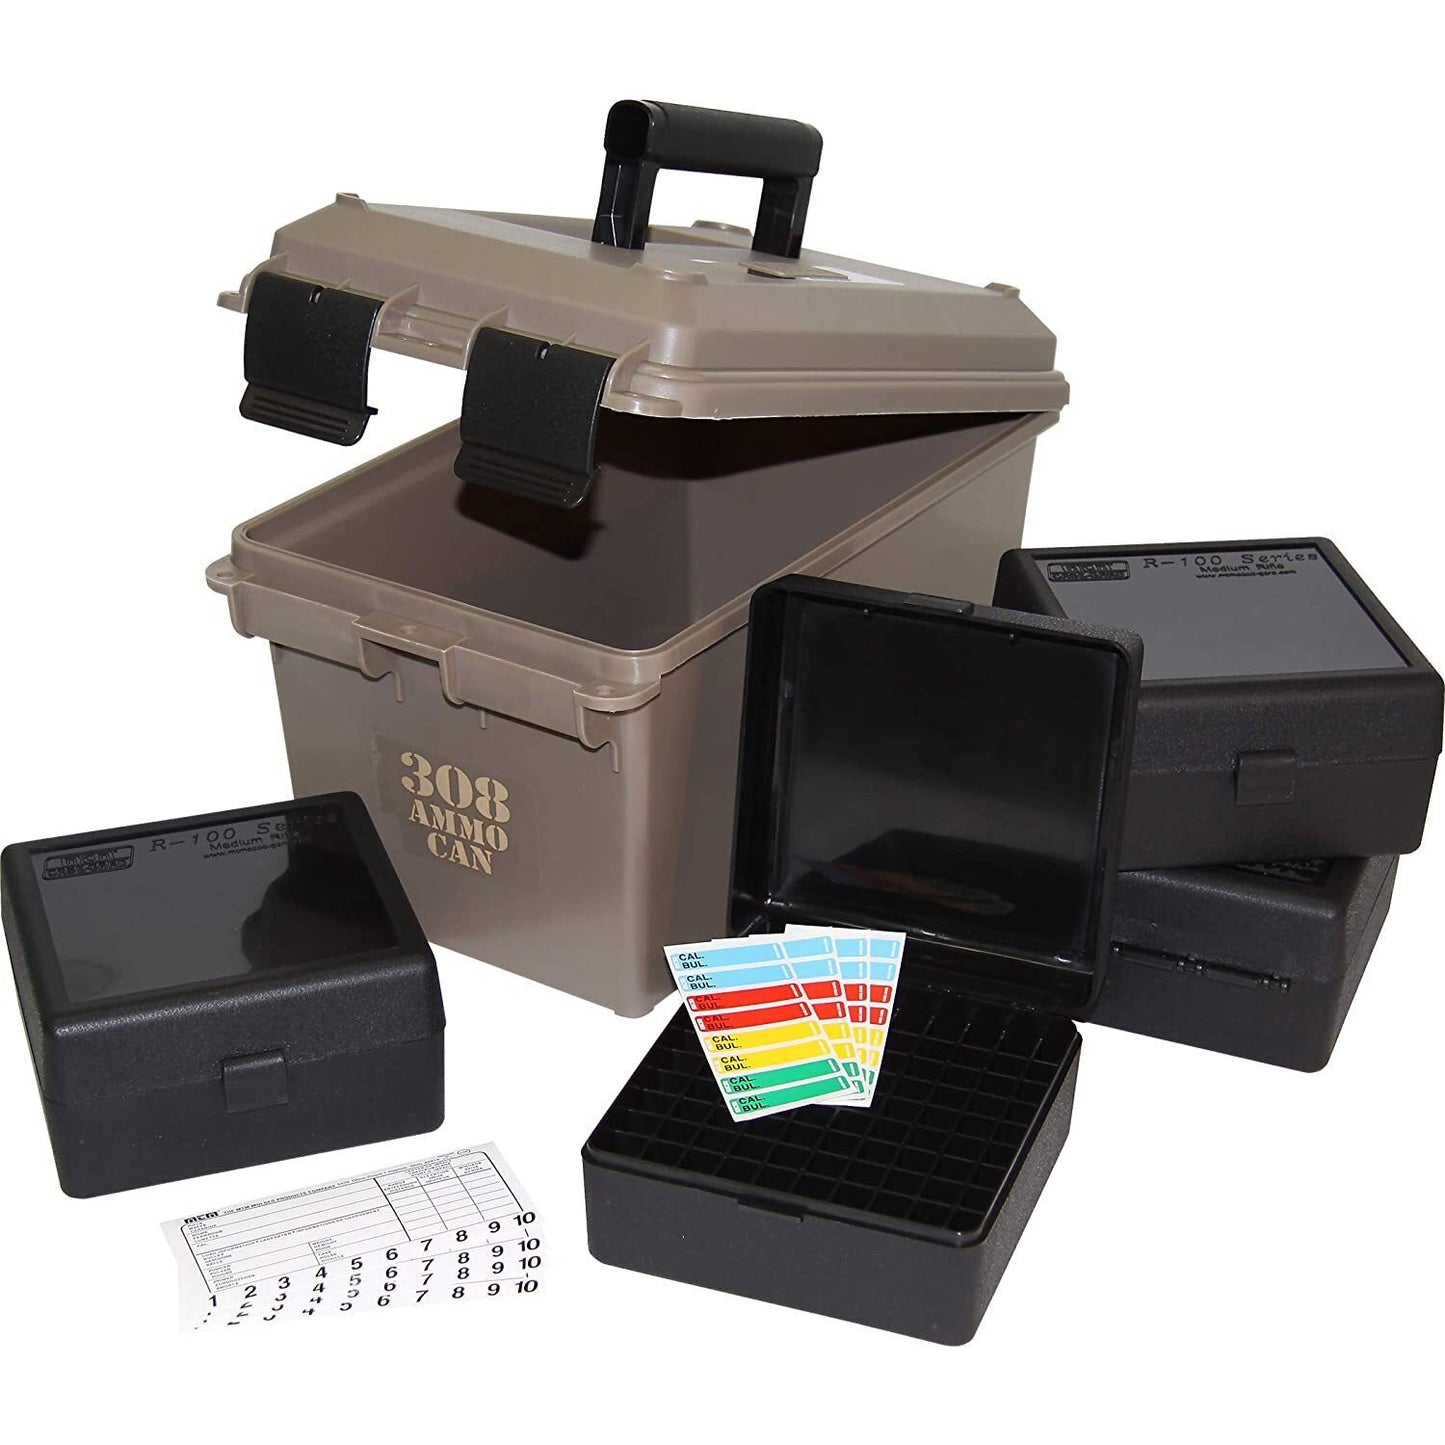 Mtm Case-Gard Mtm Ammo Can Combo - 400 Rounds 308 Cal With 4 Rm-100 Boxes #acc308 Dim Gray